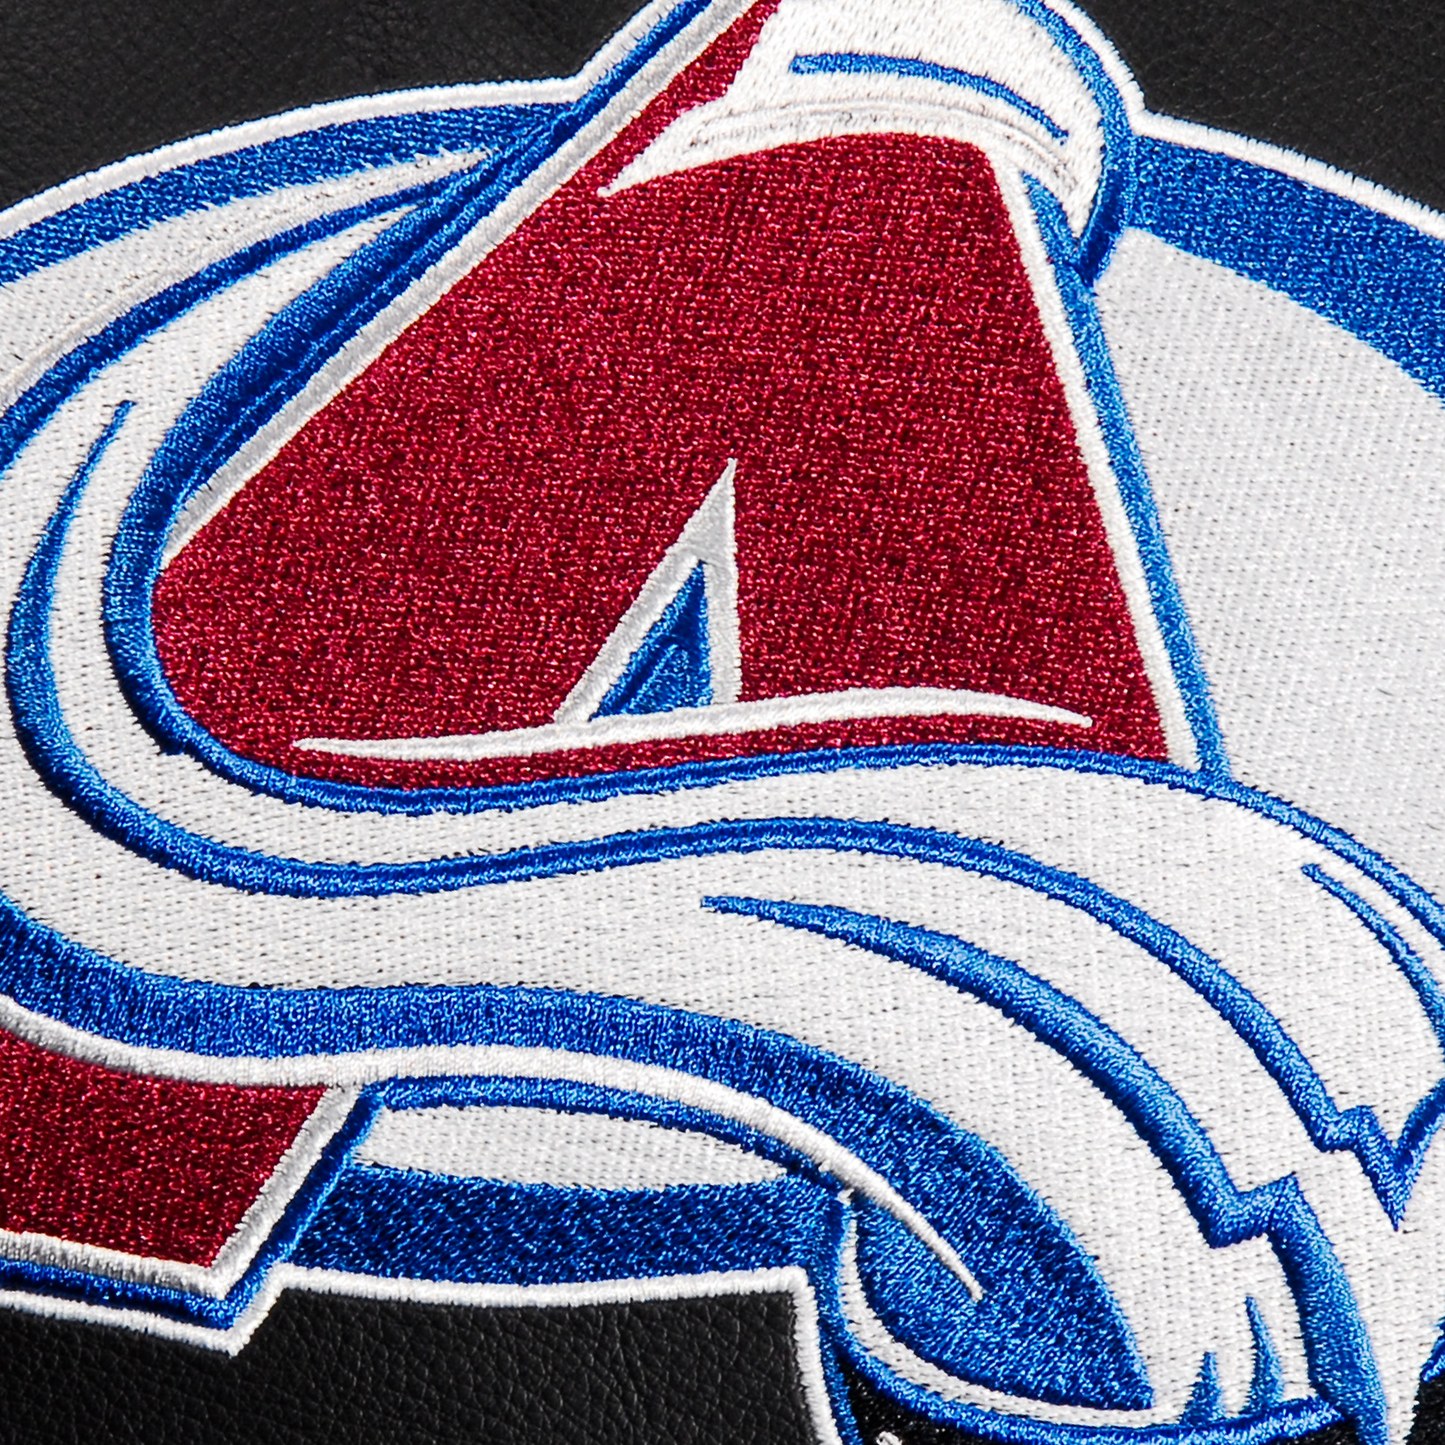 Curve Task Chair with Colorado Avalanche Logo